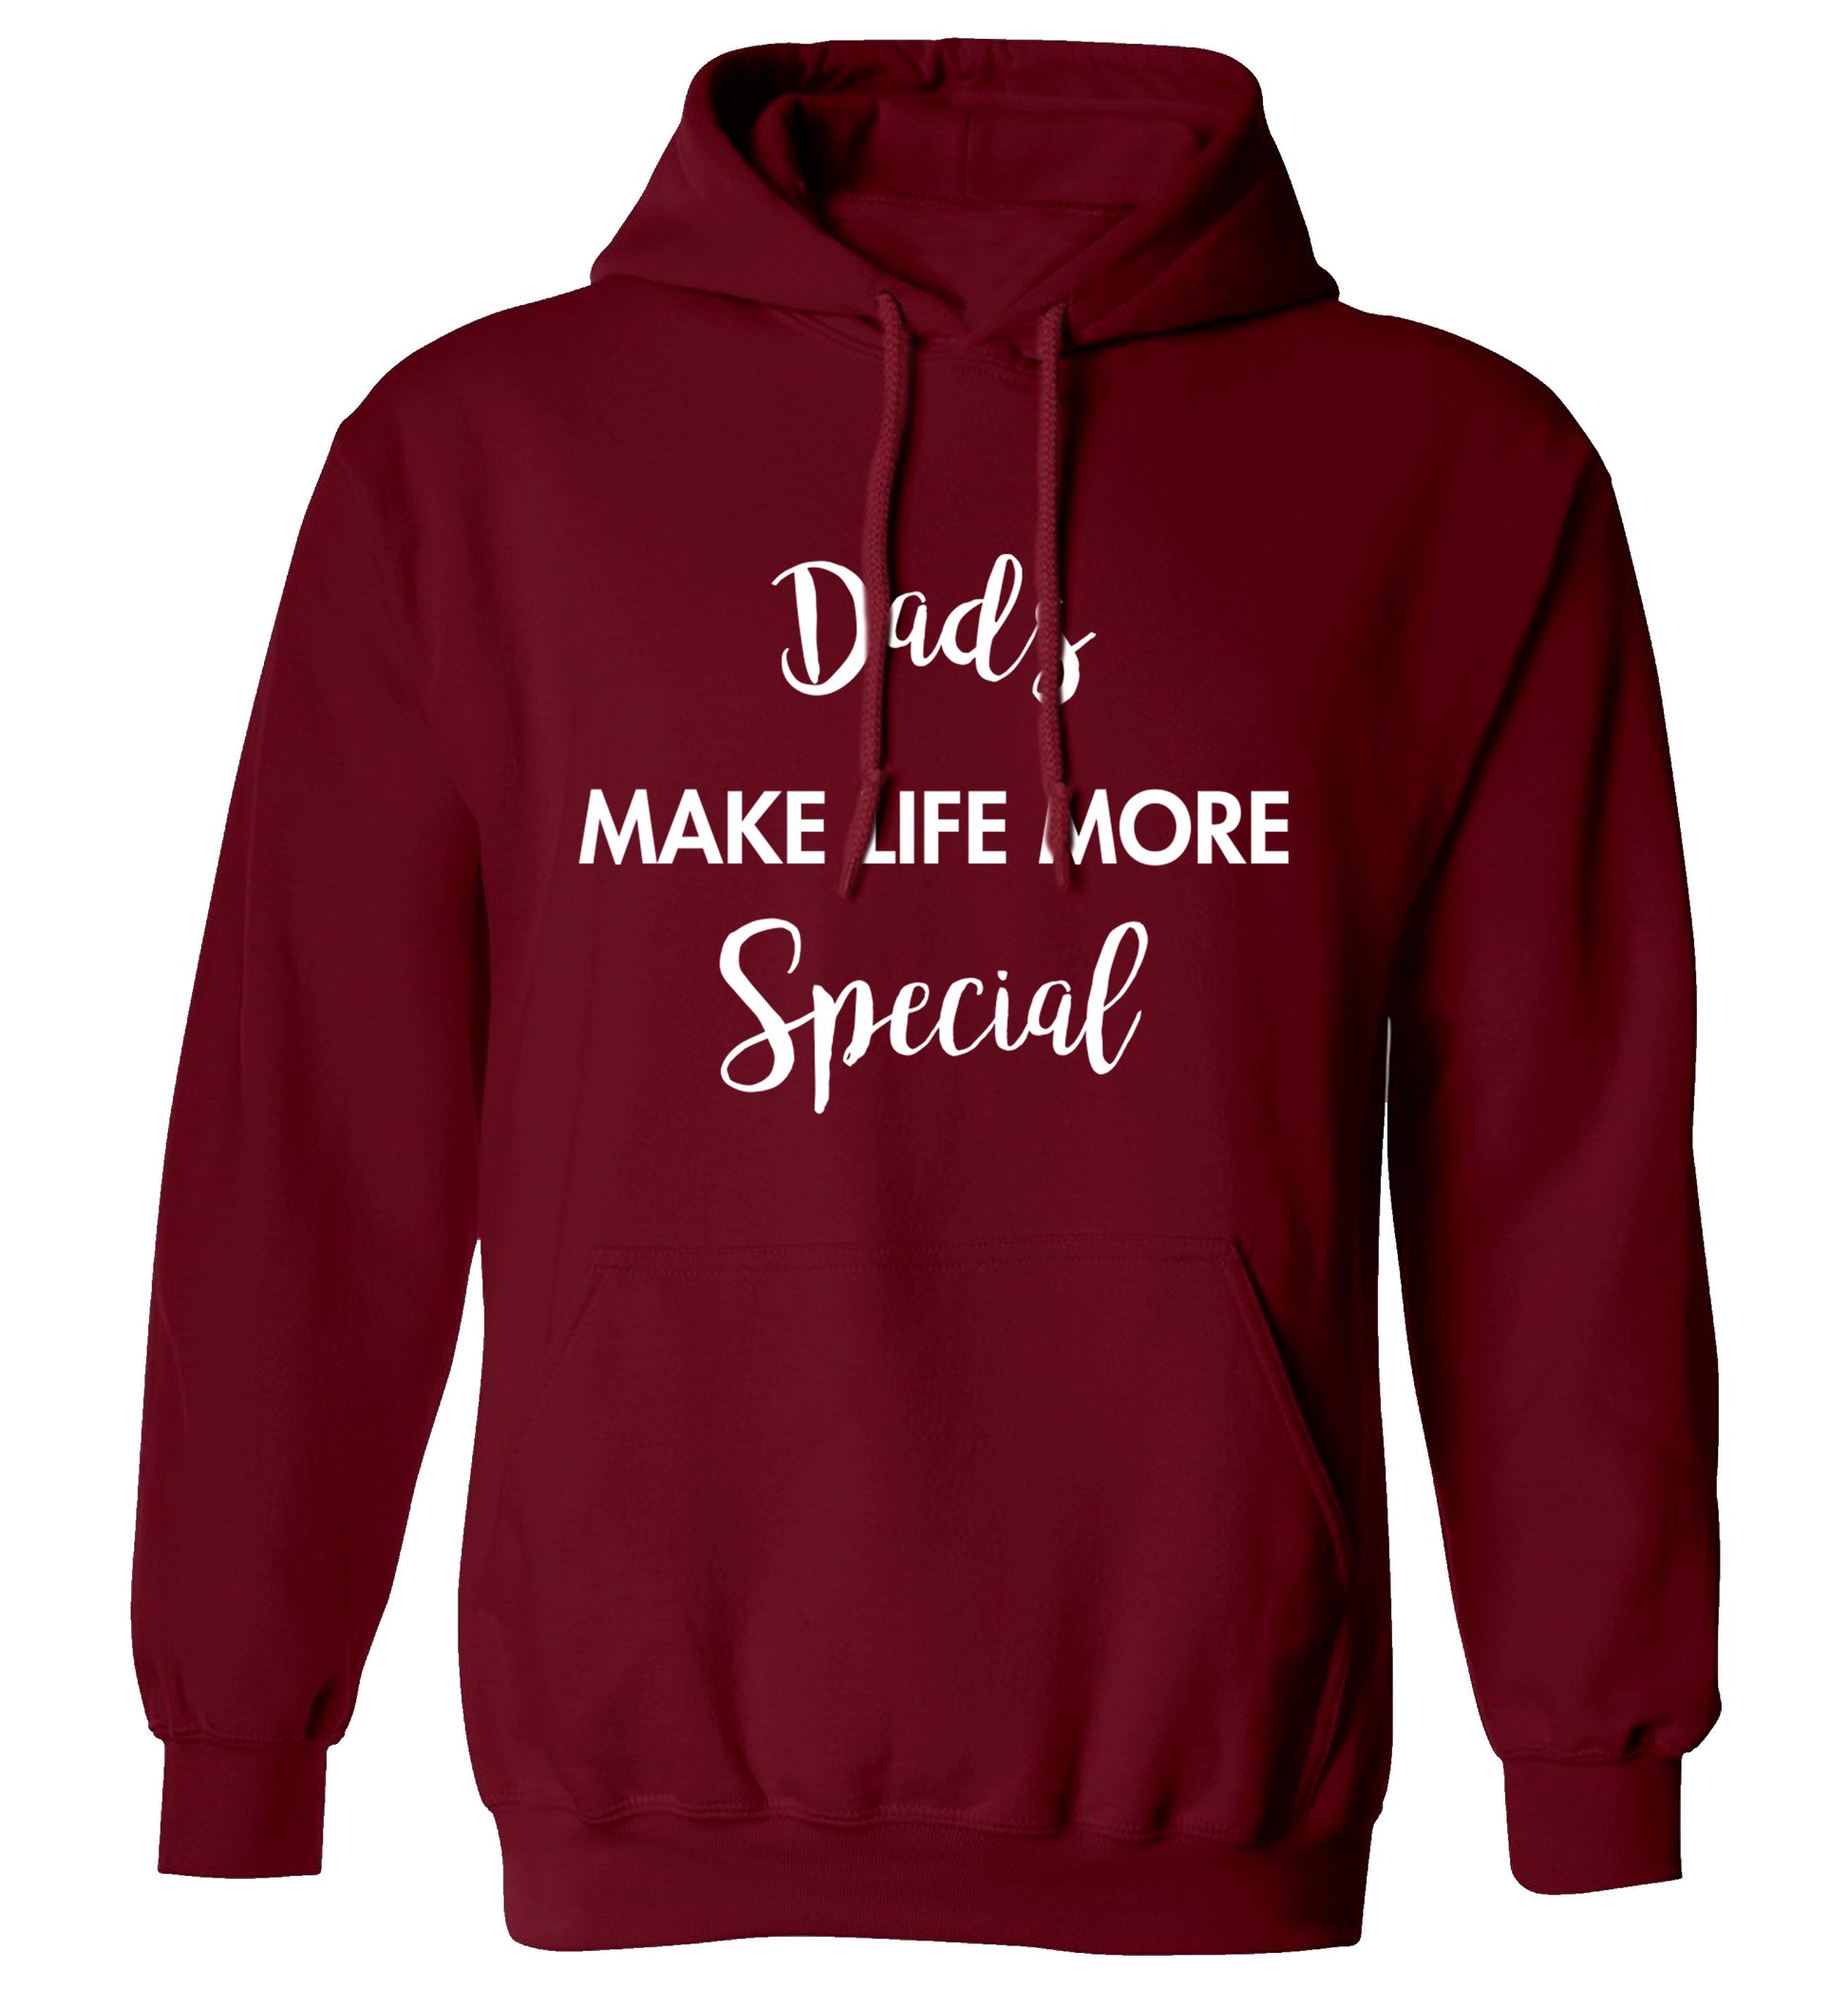 Dads make life more special adults unisex maroon hoodie 2XL